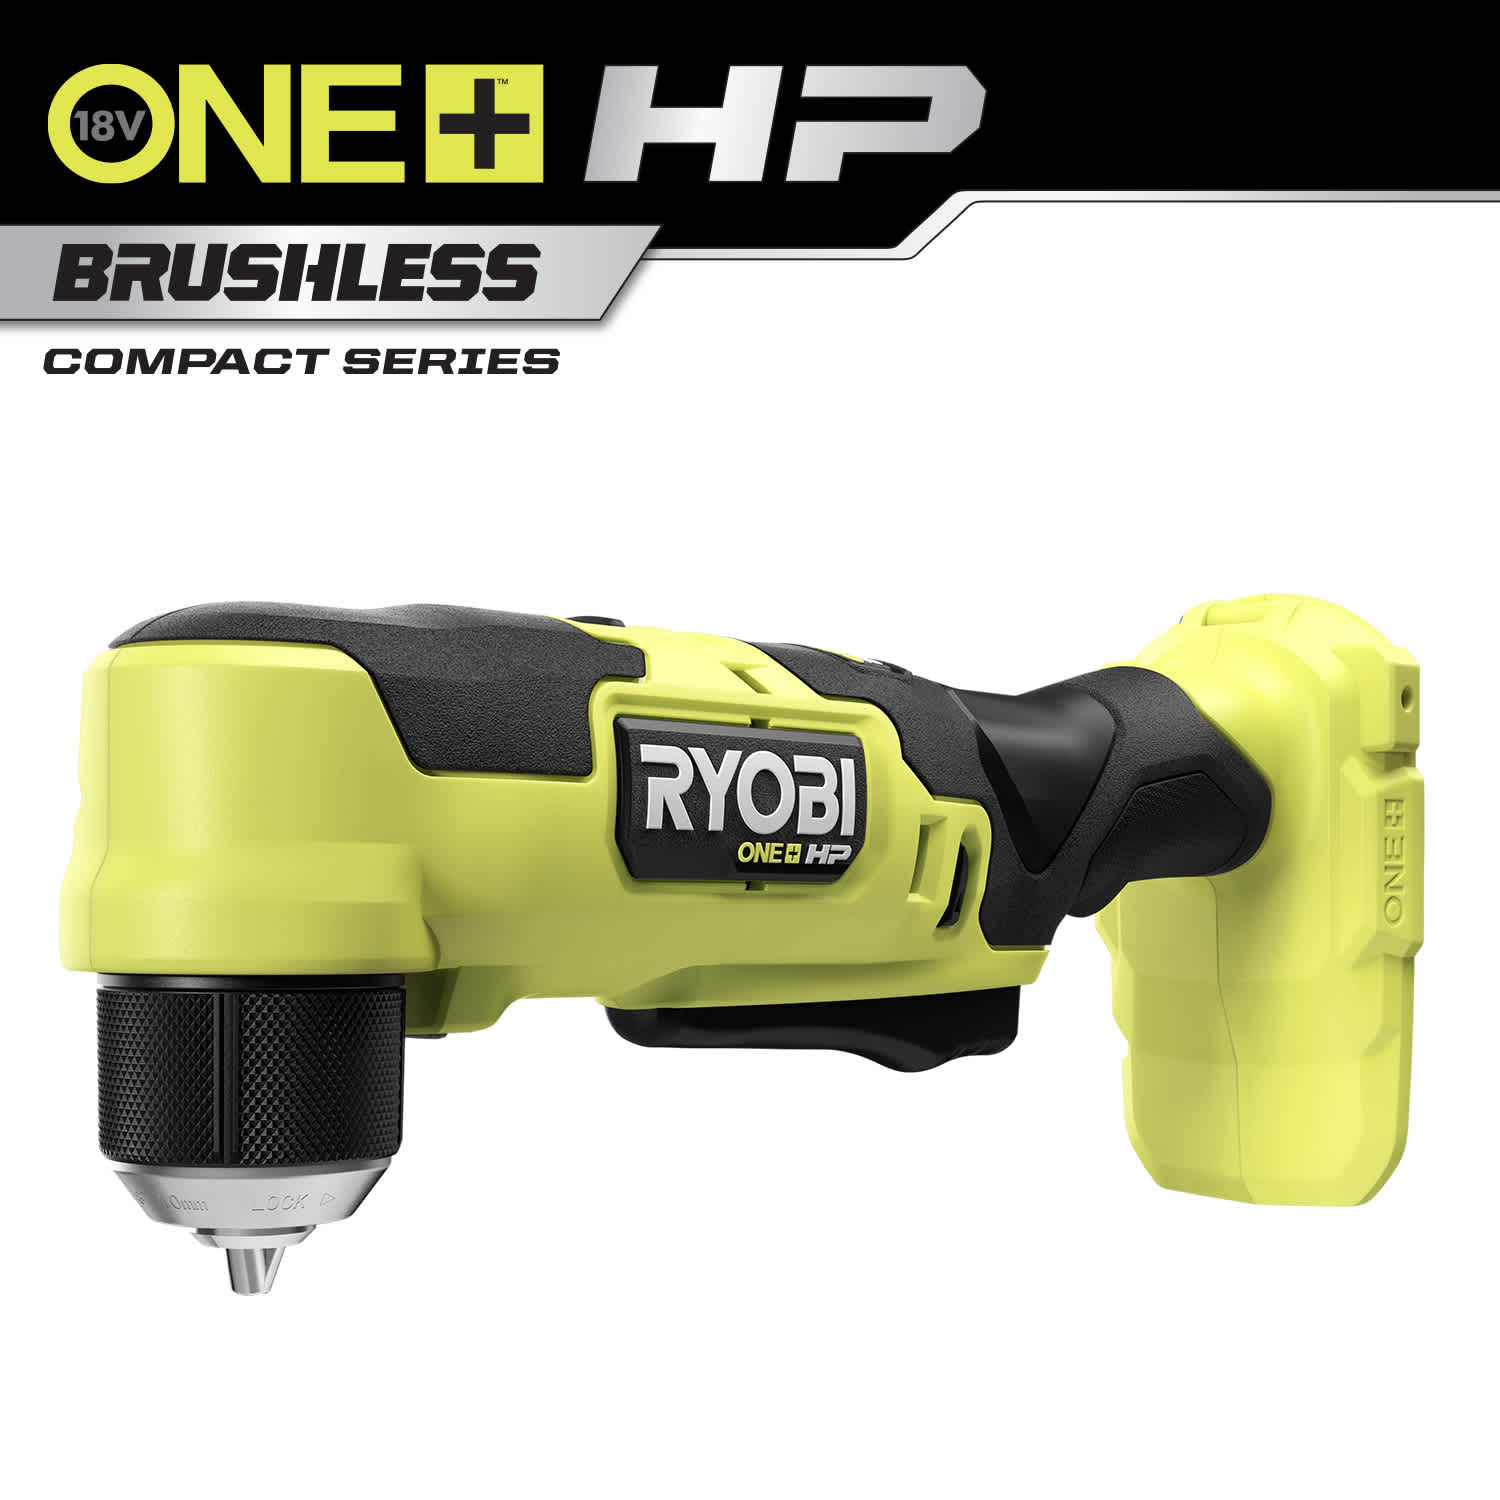 Feature Image for 18V ONE+ HP Compact Brushless 3/8” Right Angle Drill.